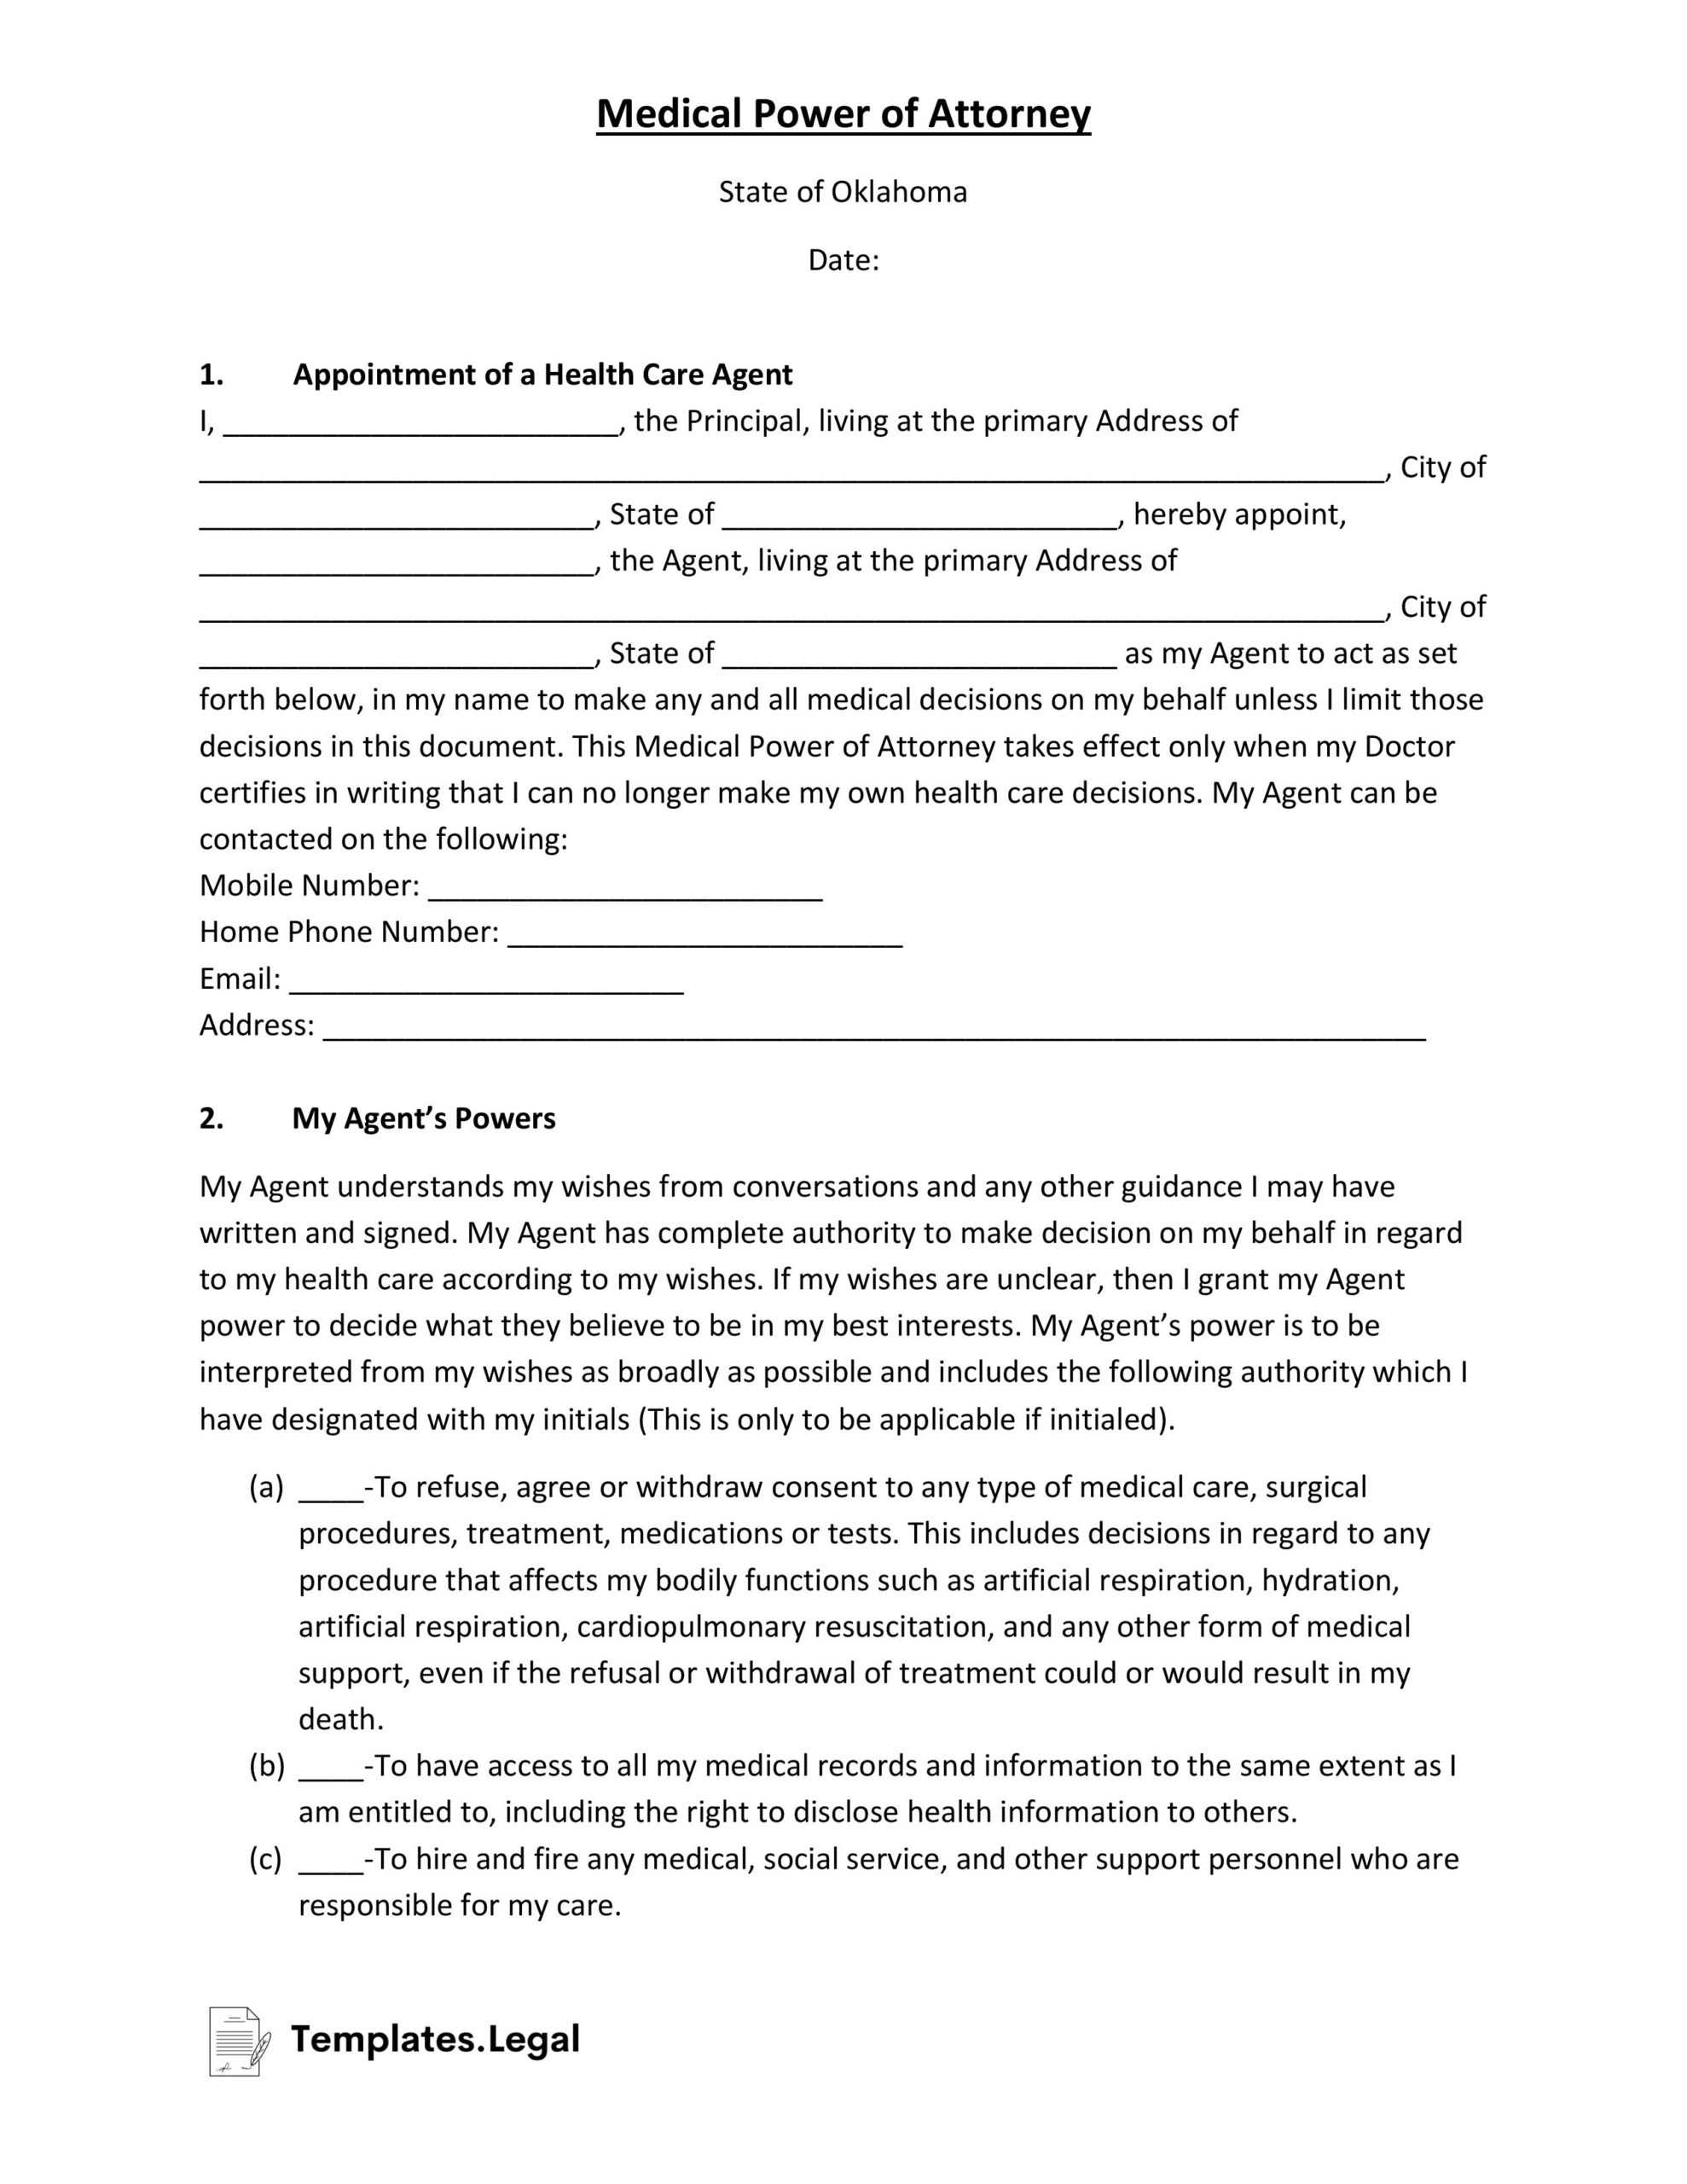 Oklahoma Medical Power of Attorney- Templates.Legal